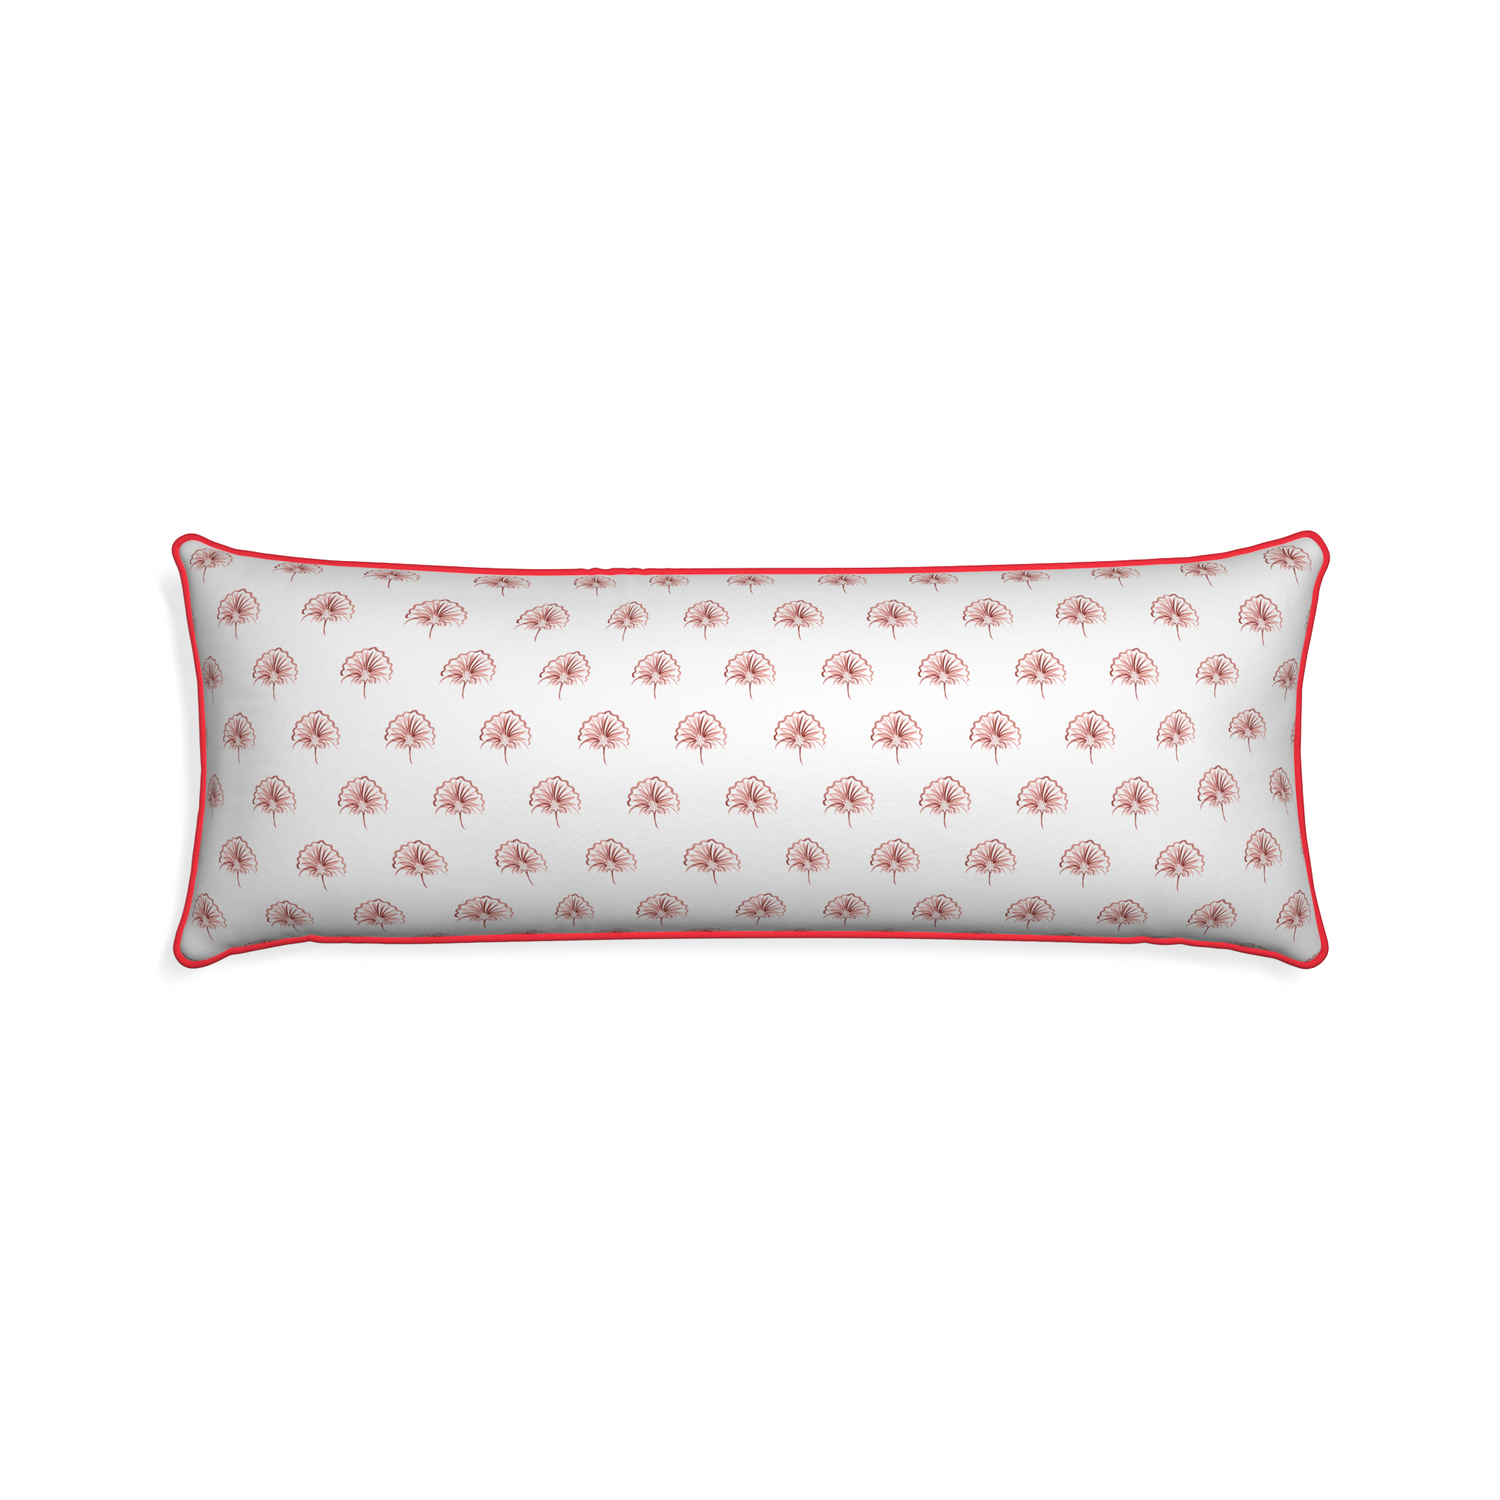 Xl-lumbar penelope rose custom pillow with cherry piping on white background